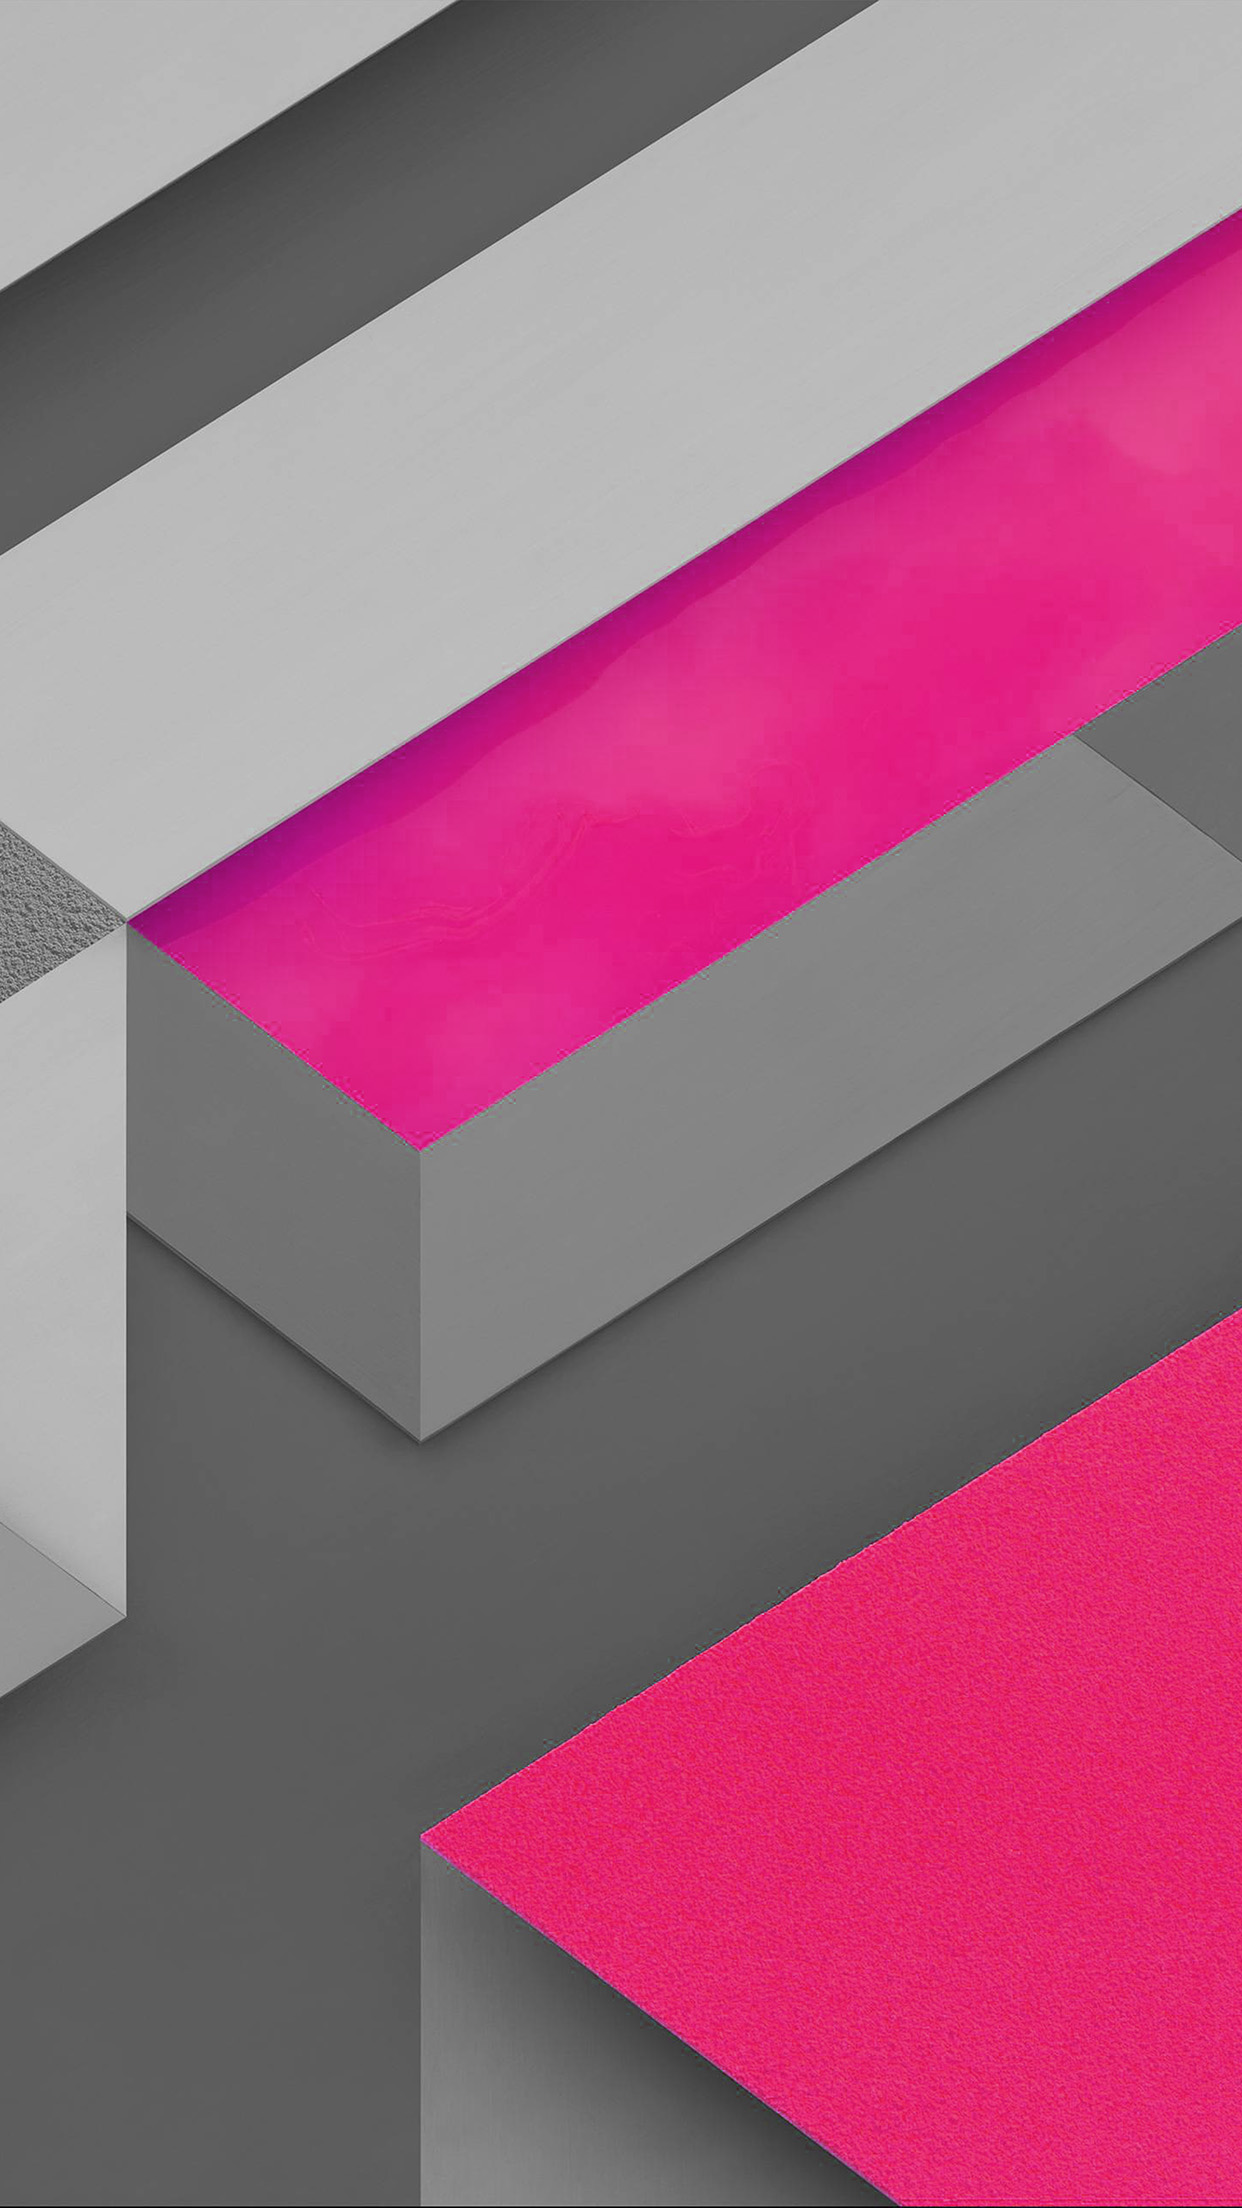 Marshmallow Android Hotpink Triangle Pattern Android wallpaper